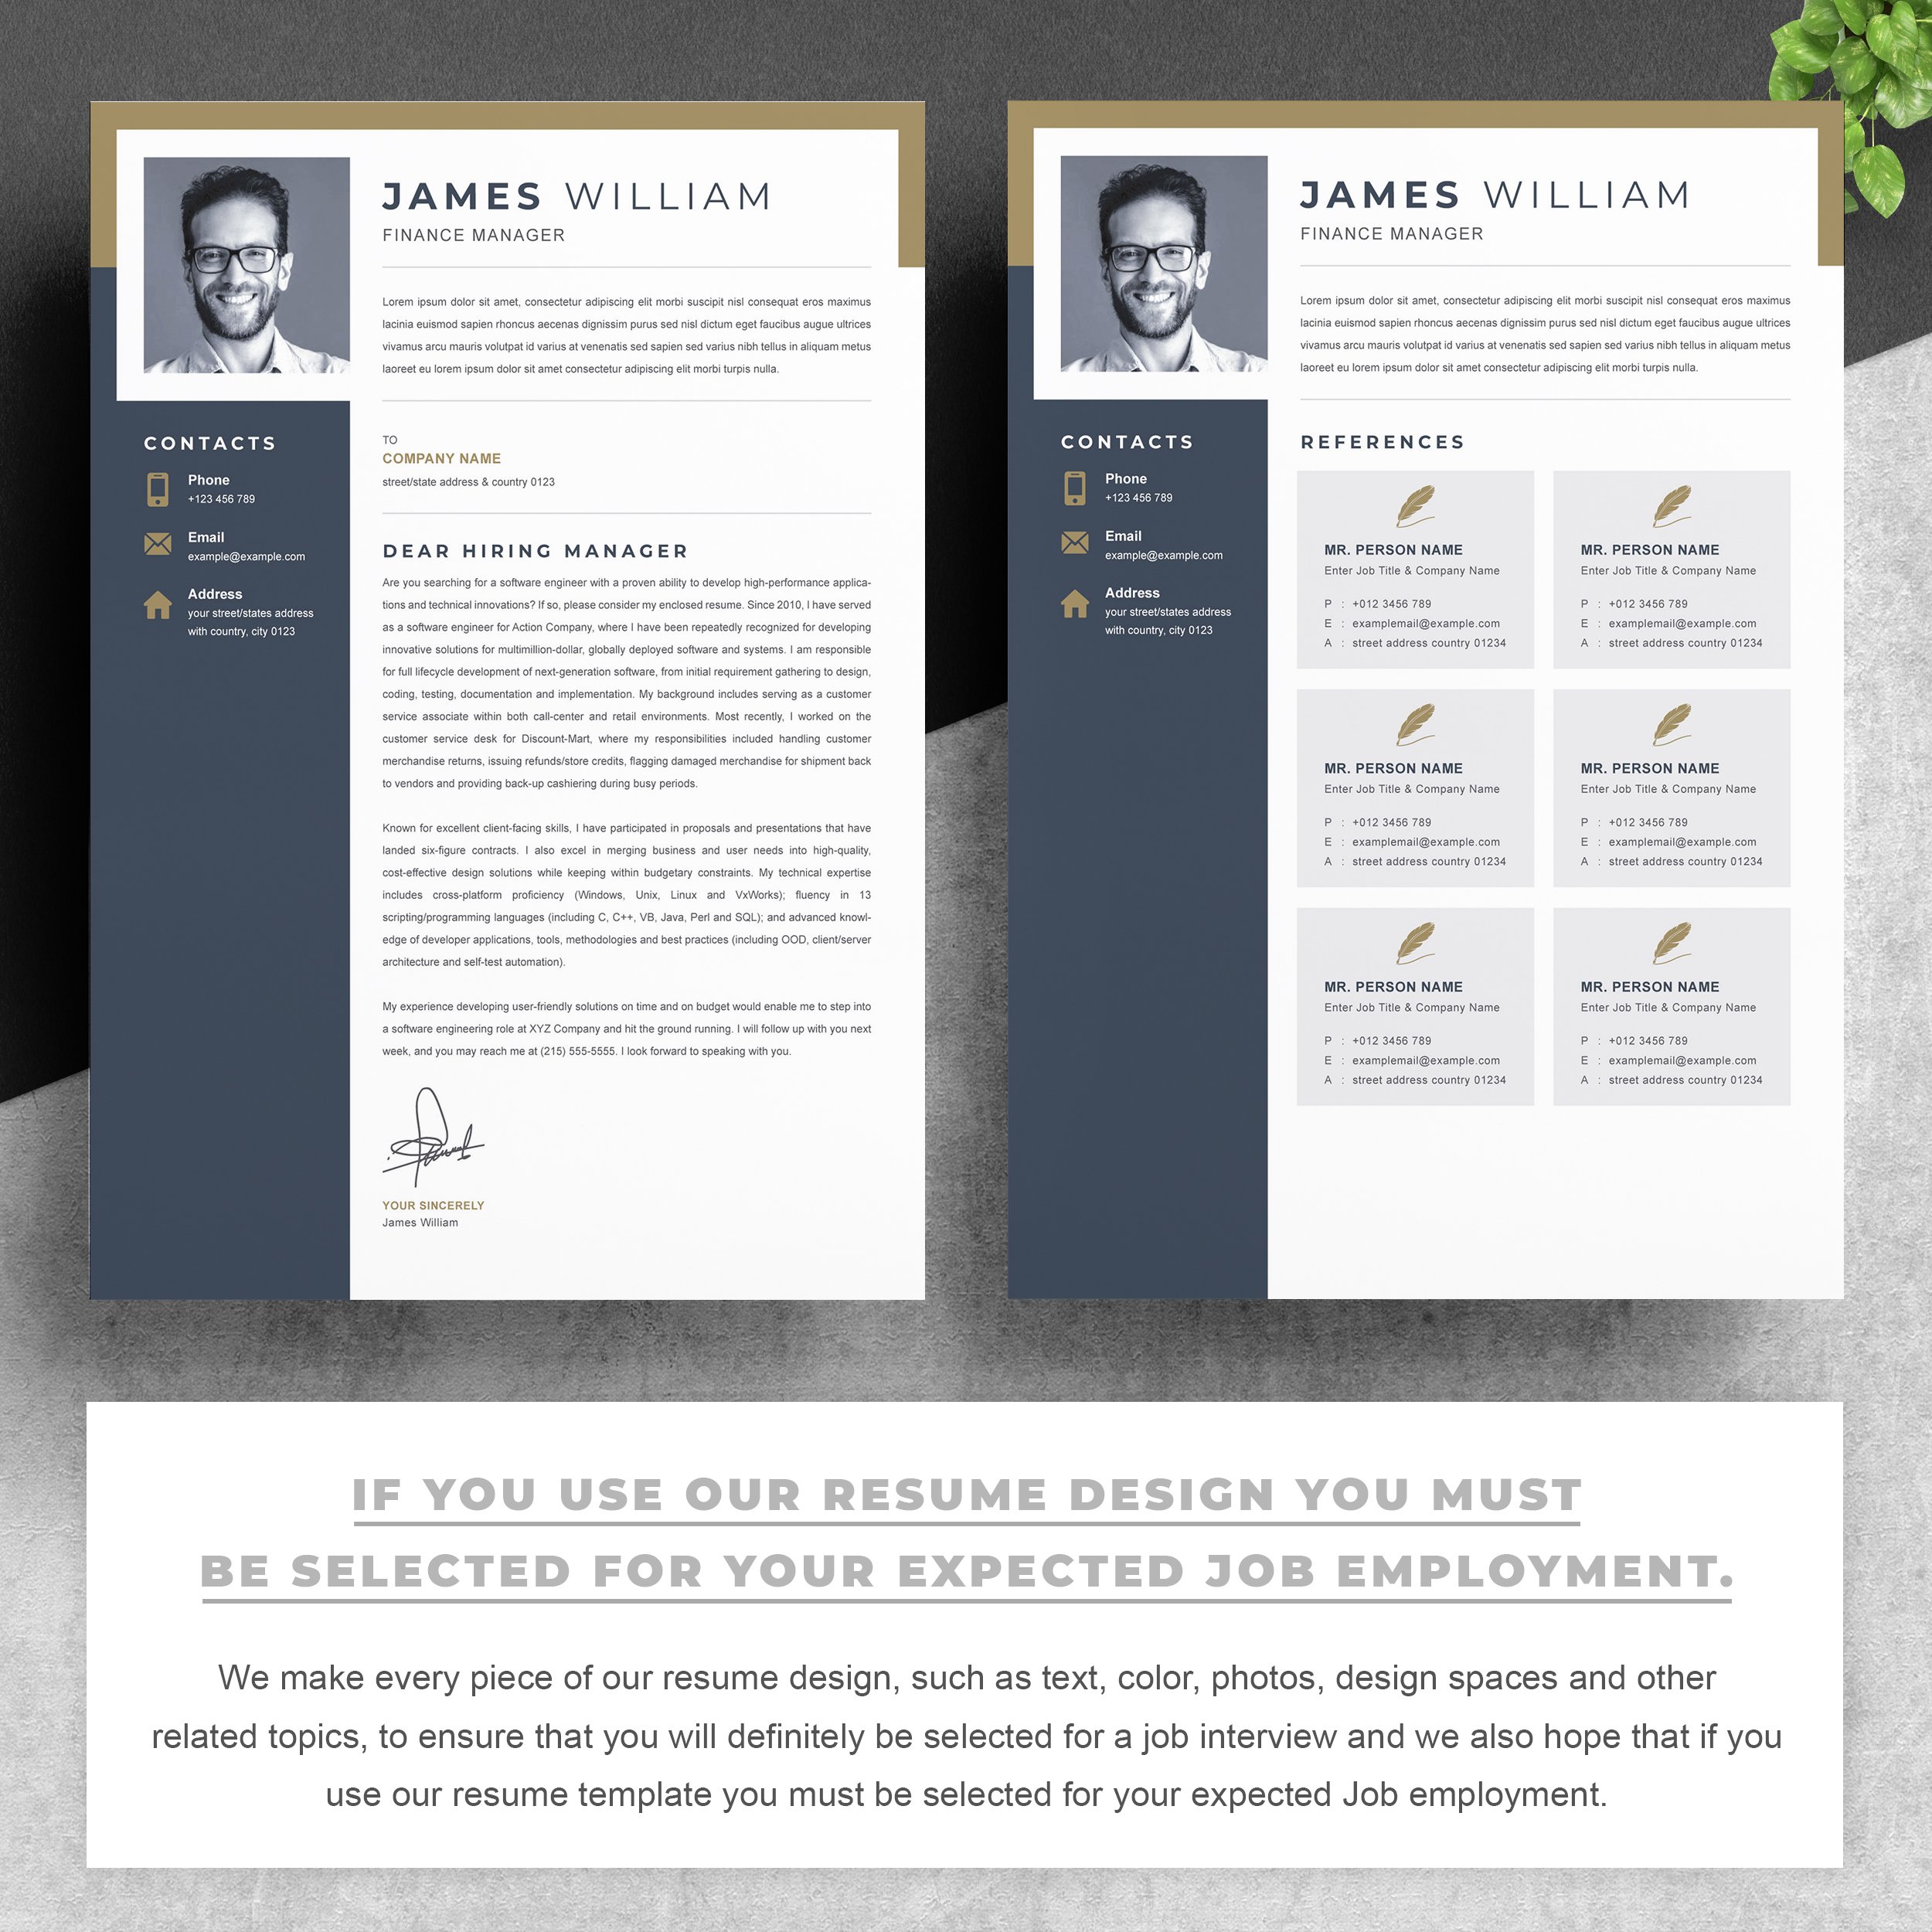 03 2 pages free resume design template copy 239